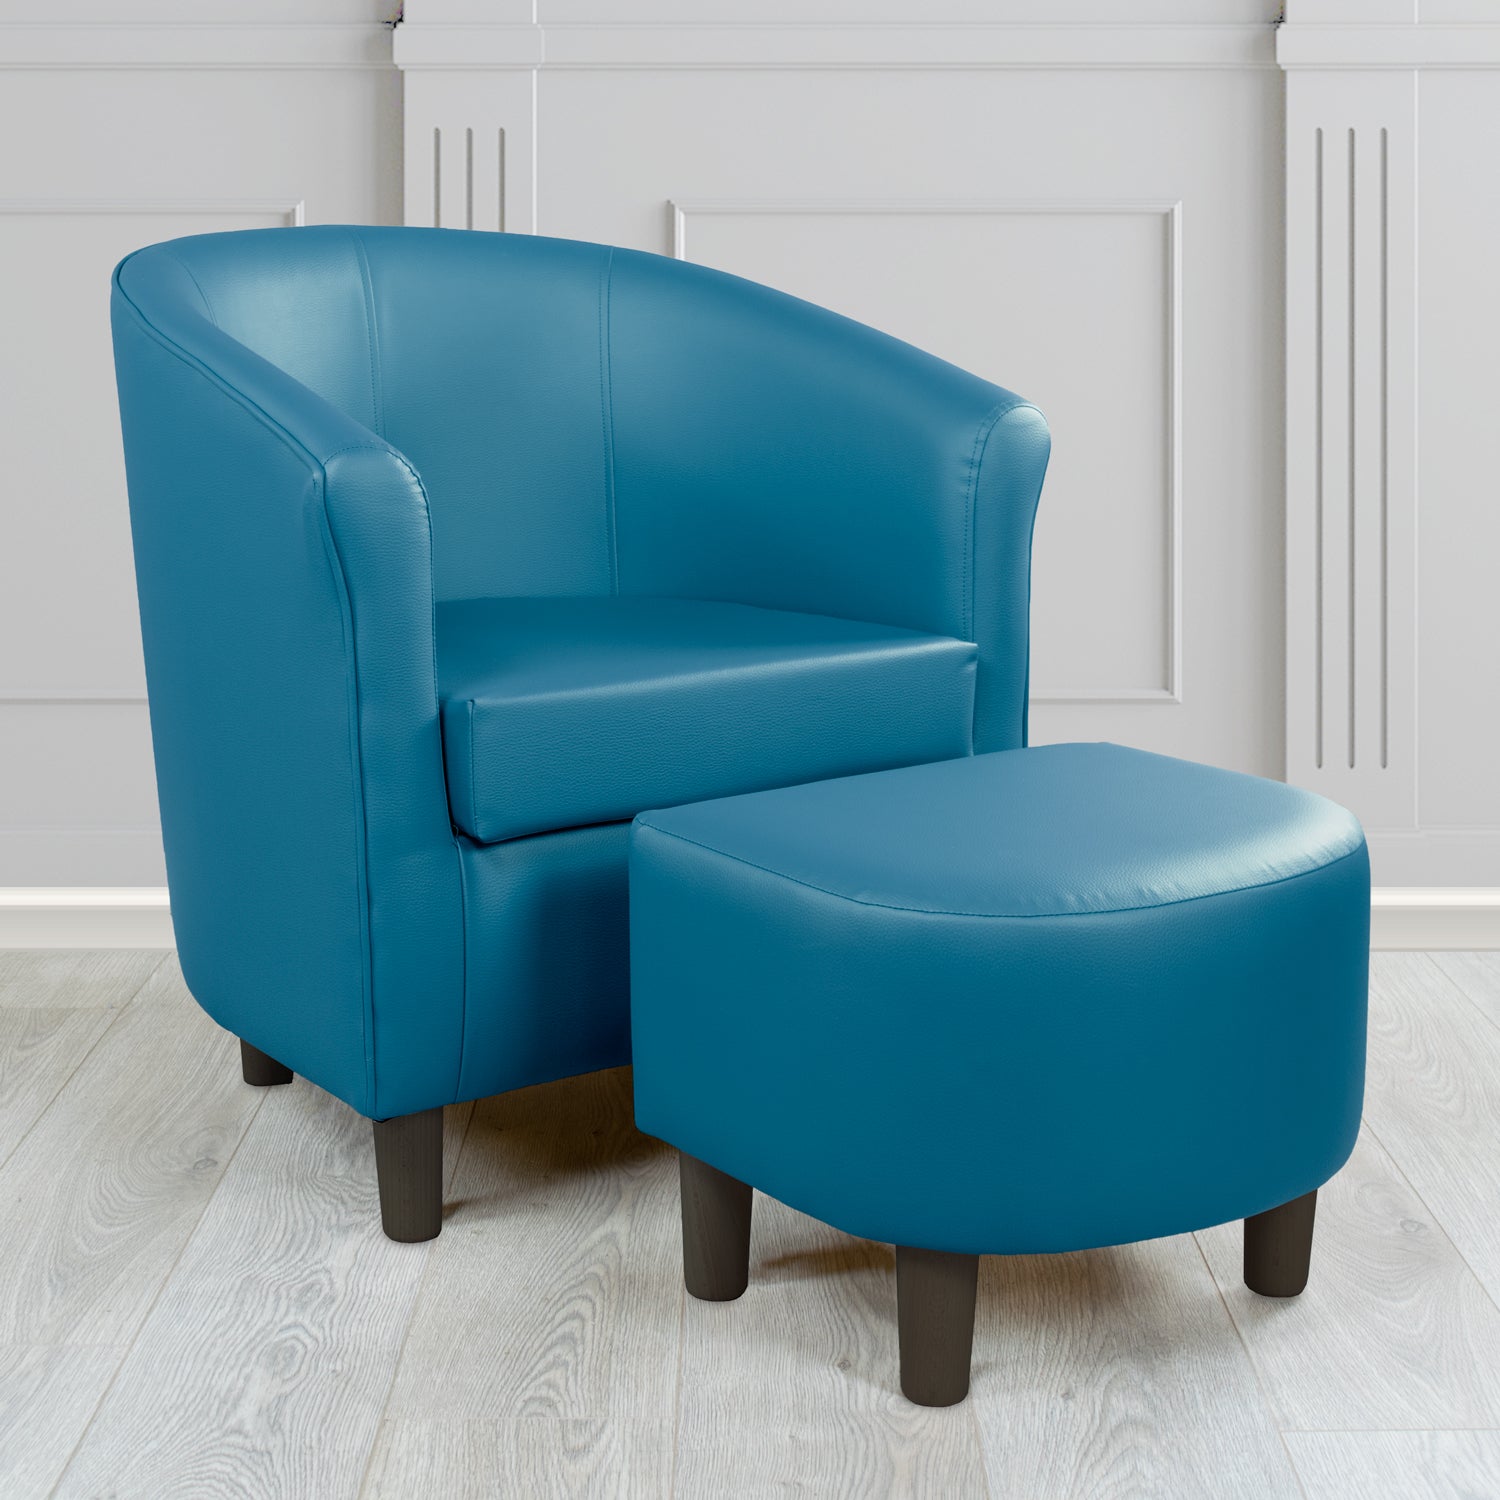 Tuscany Just Colour Aquamarine Faux Leather Tub Chair with Dee Footstool Set - The Tub Chair Shop